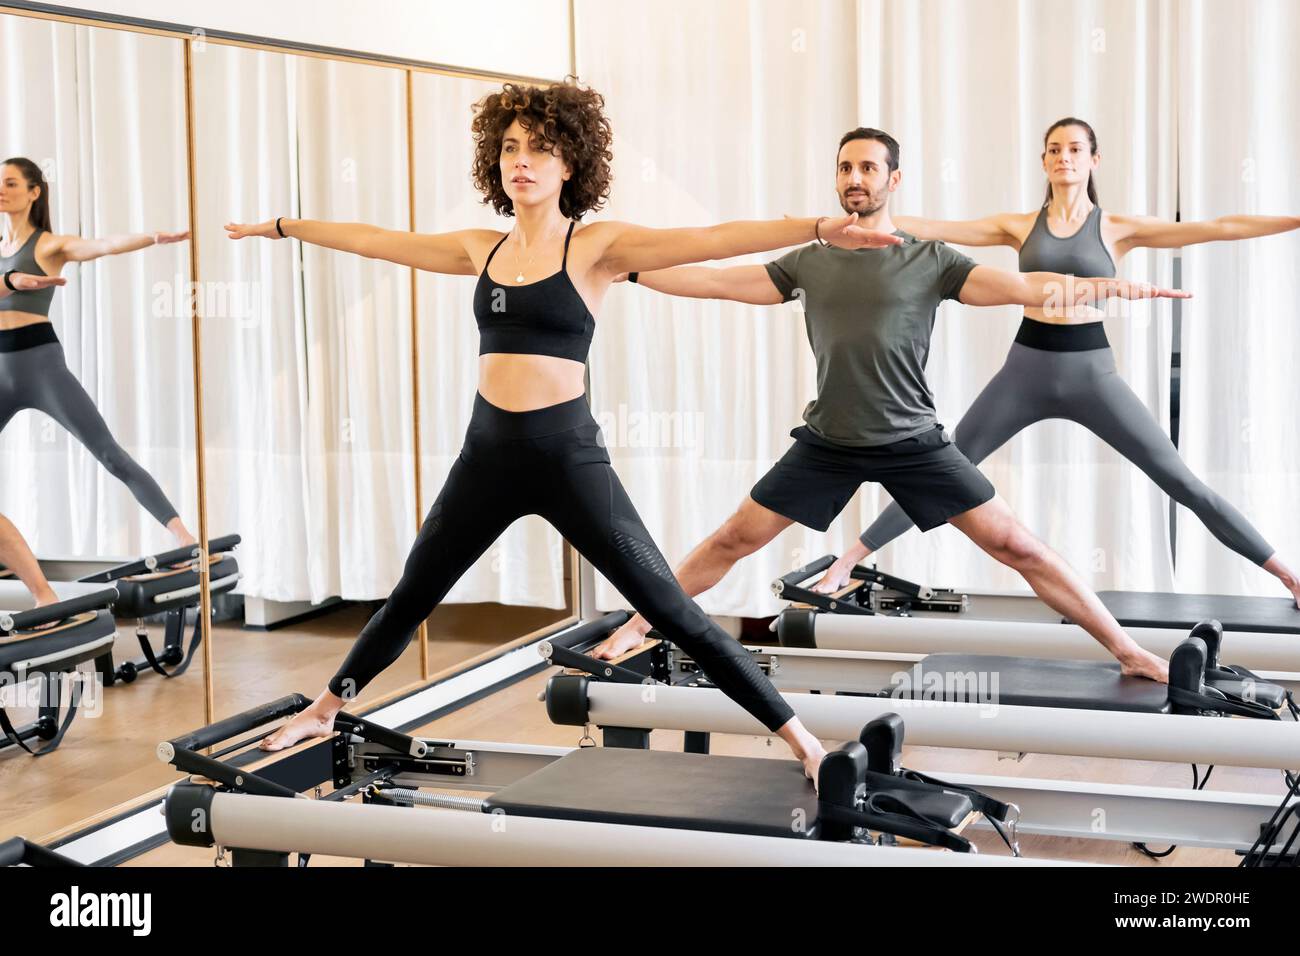 Pilates class of athletes doing a standing lunge exercise on